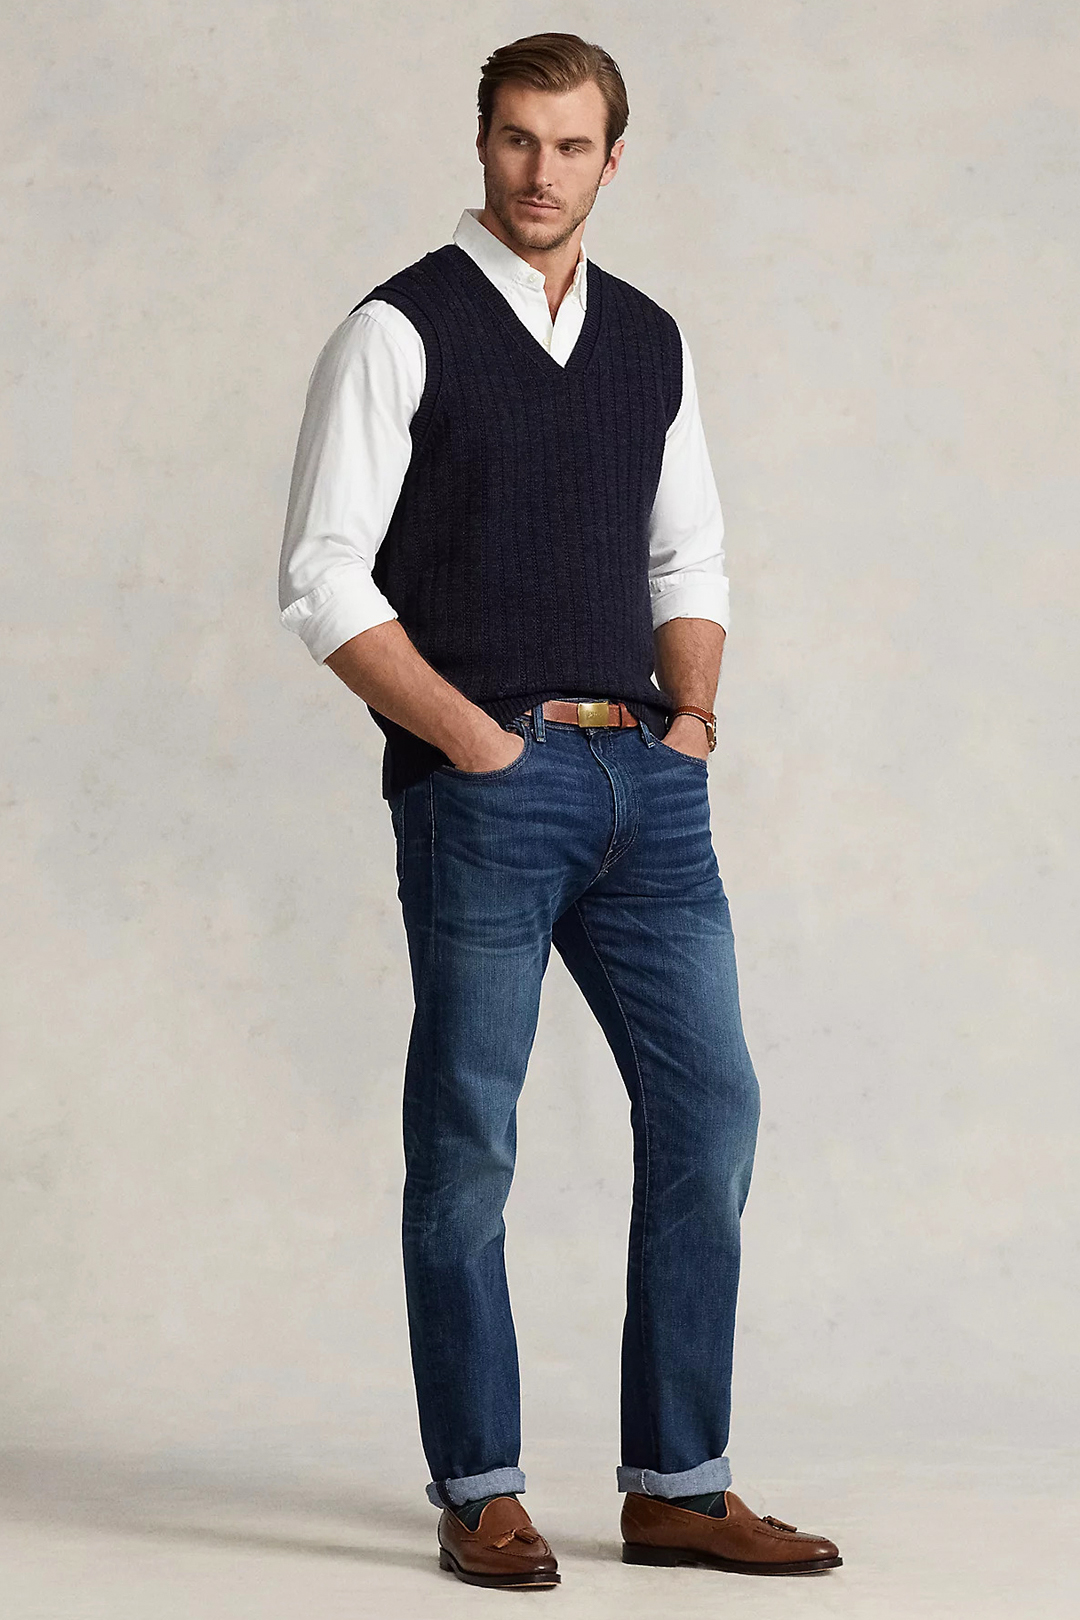 Navy sweater vest, white dress shirt, navy denim jeans and brown loafers outfit